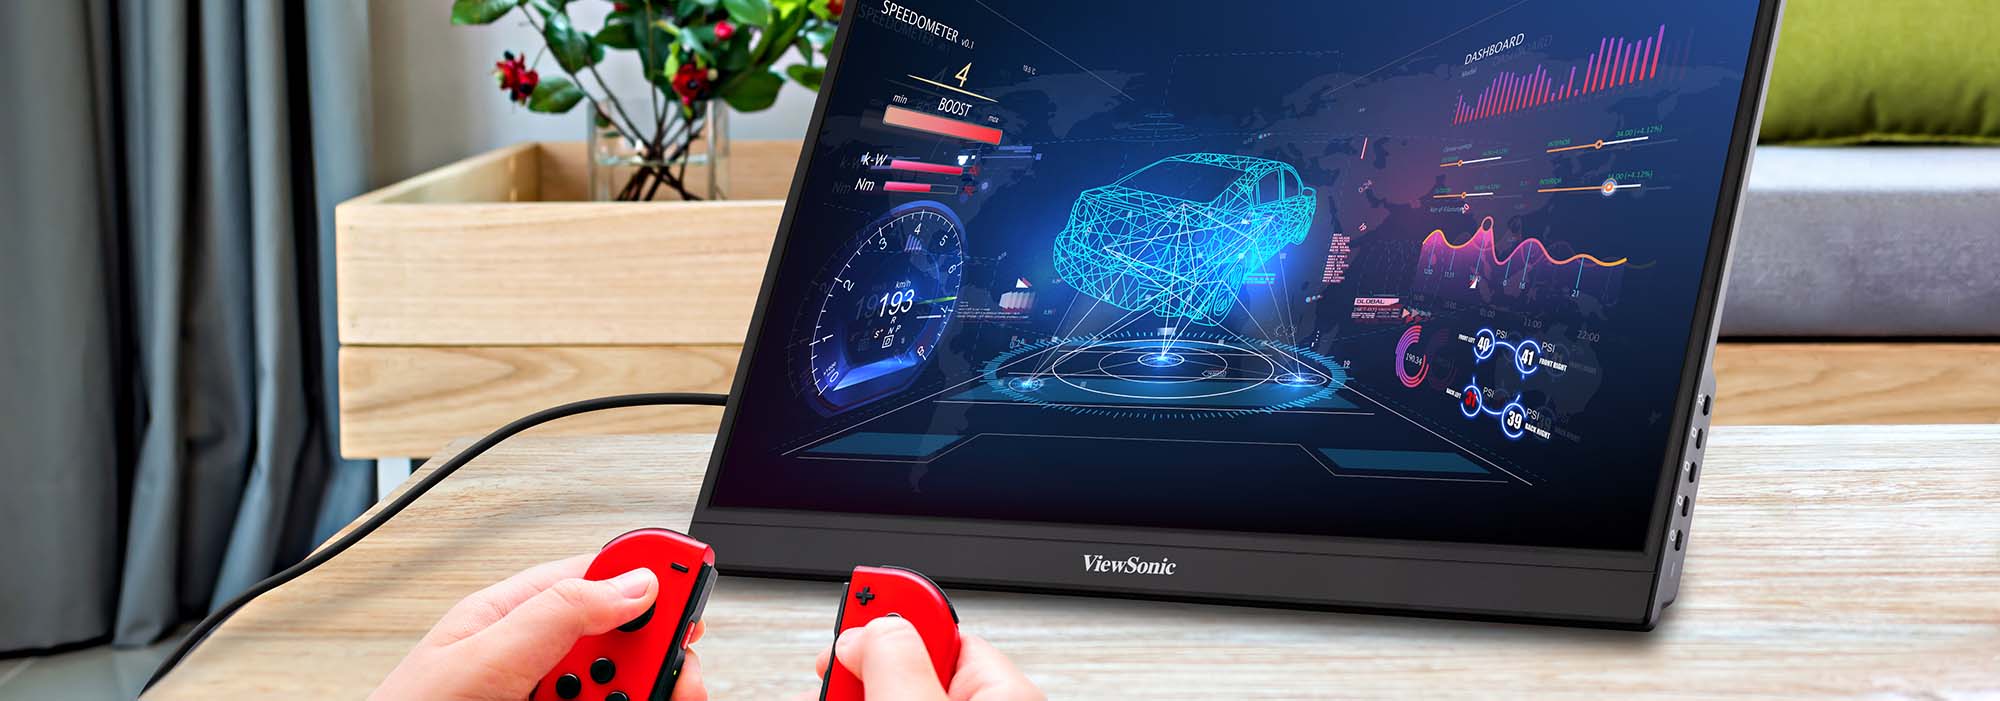 ViewSonic Introduces New Portable Monitor Designed for Mobile, PC and Console Gaming